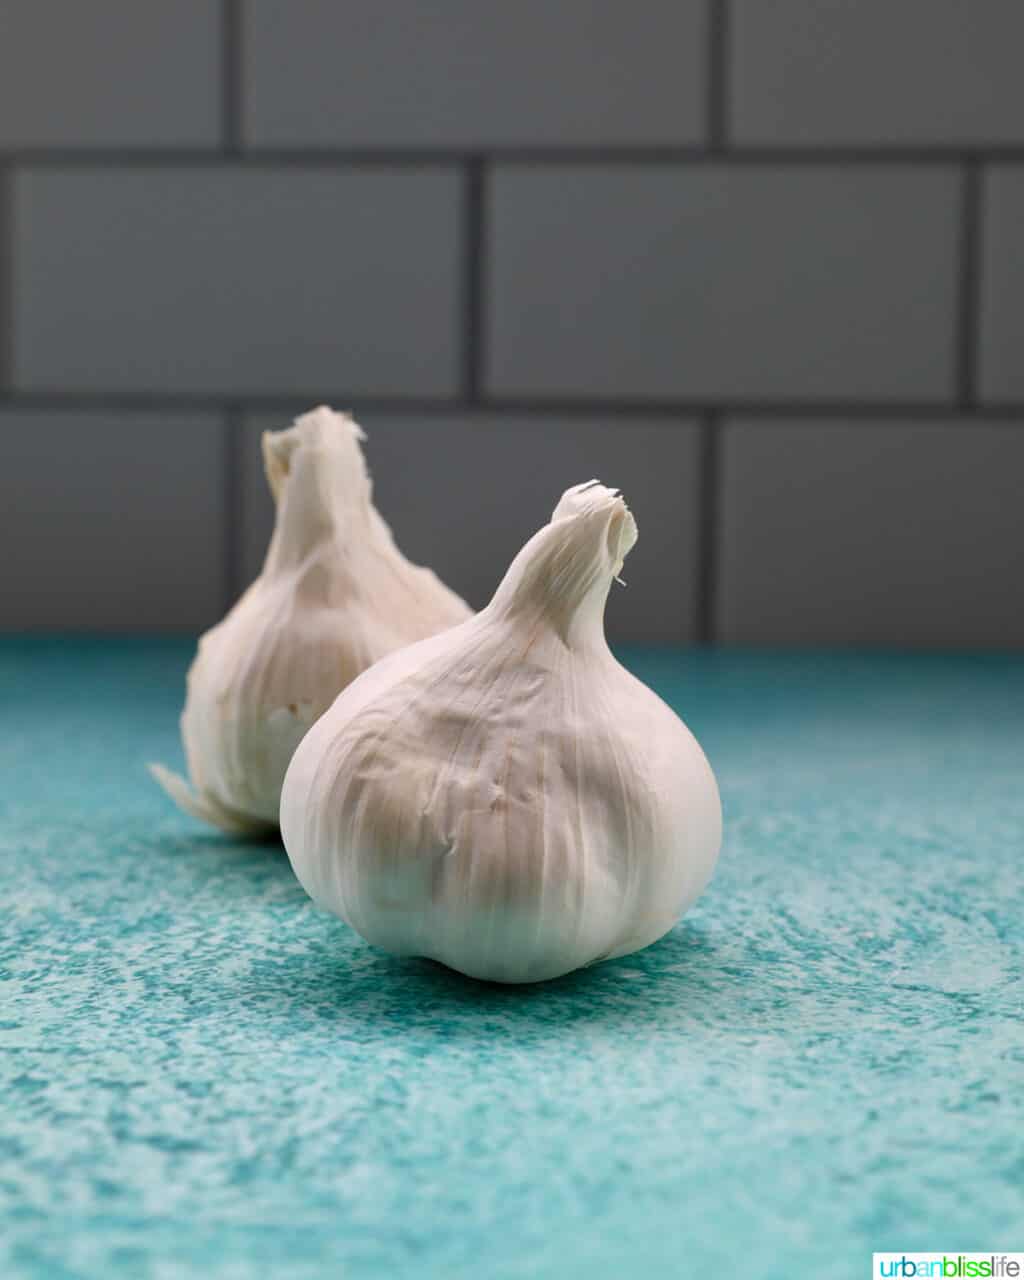 two garlic bulbs on a blue table with white tile background.